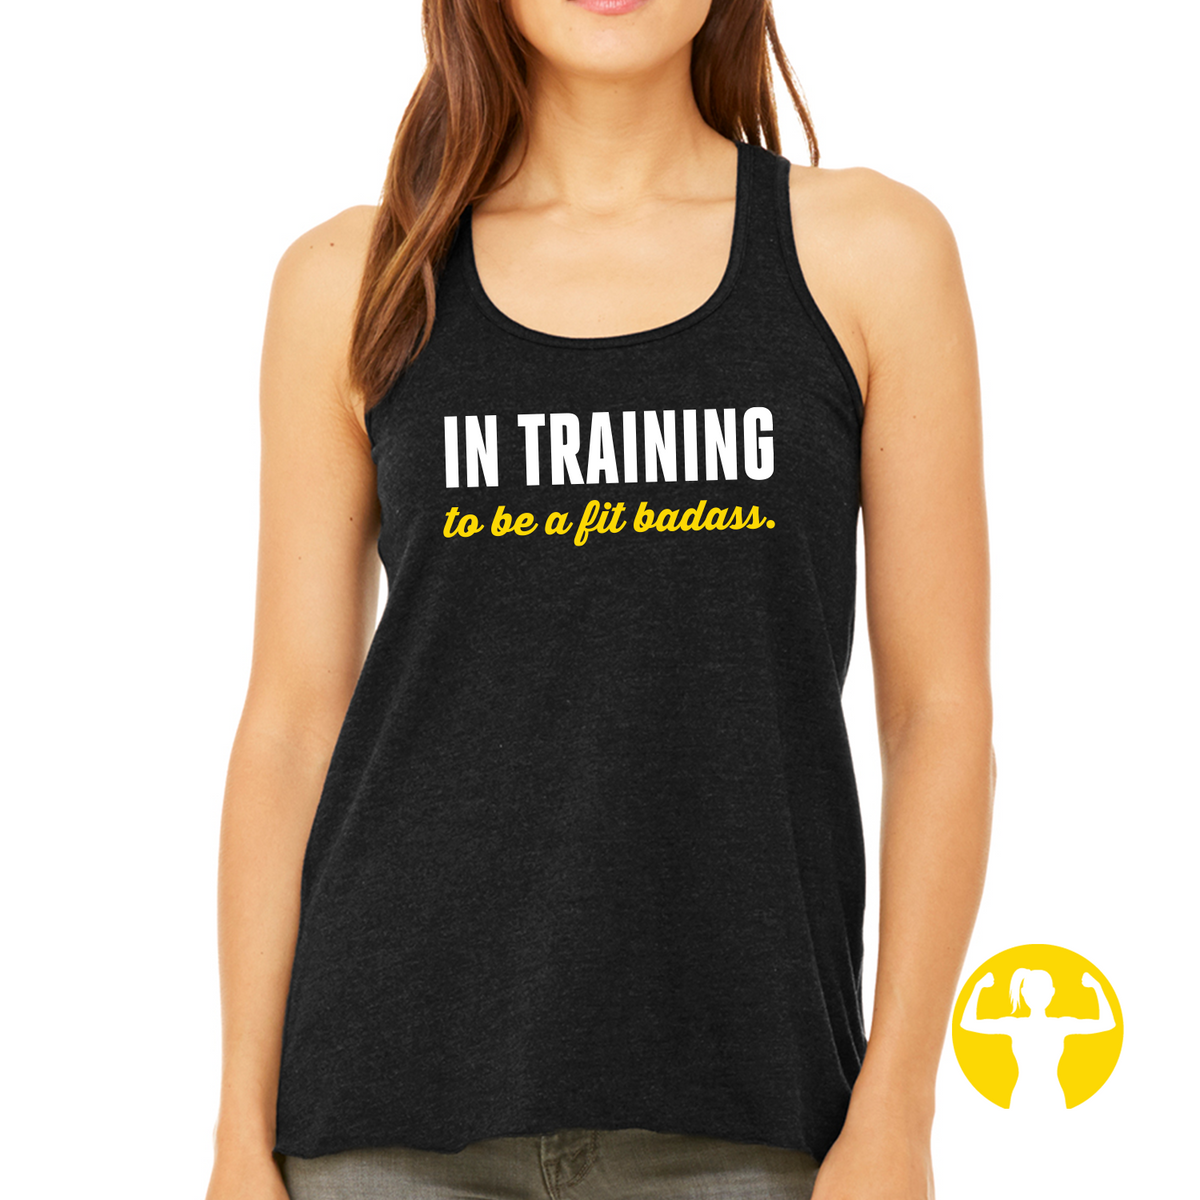 In Training to be a Fit Badass